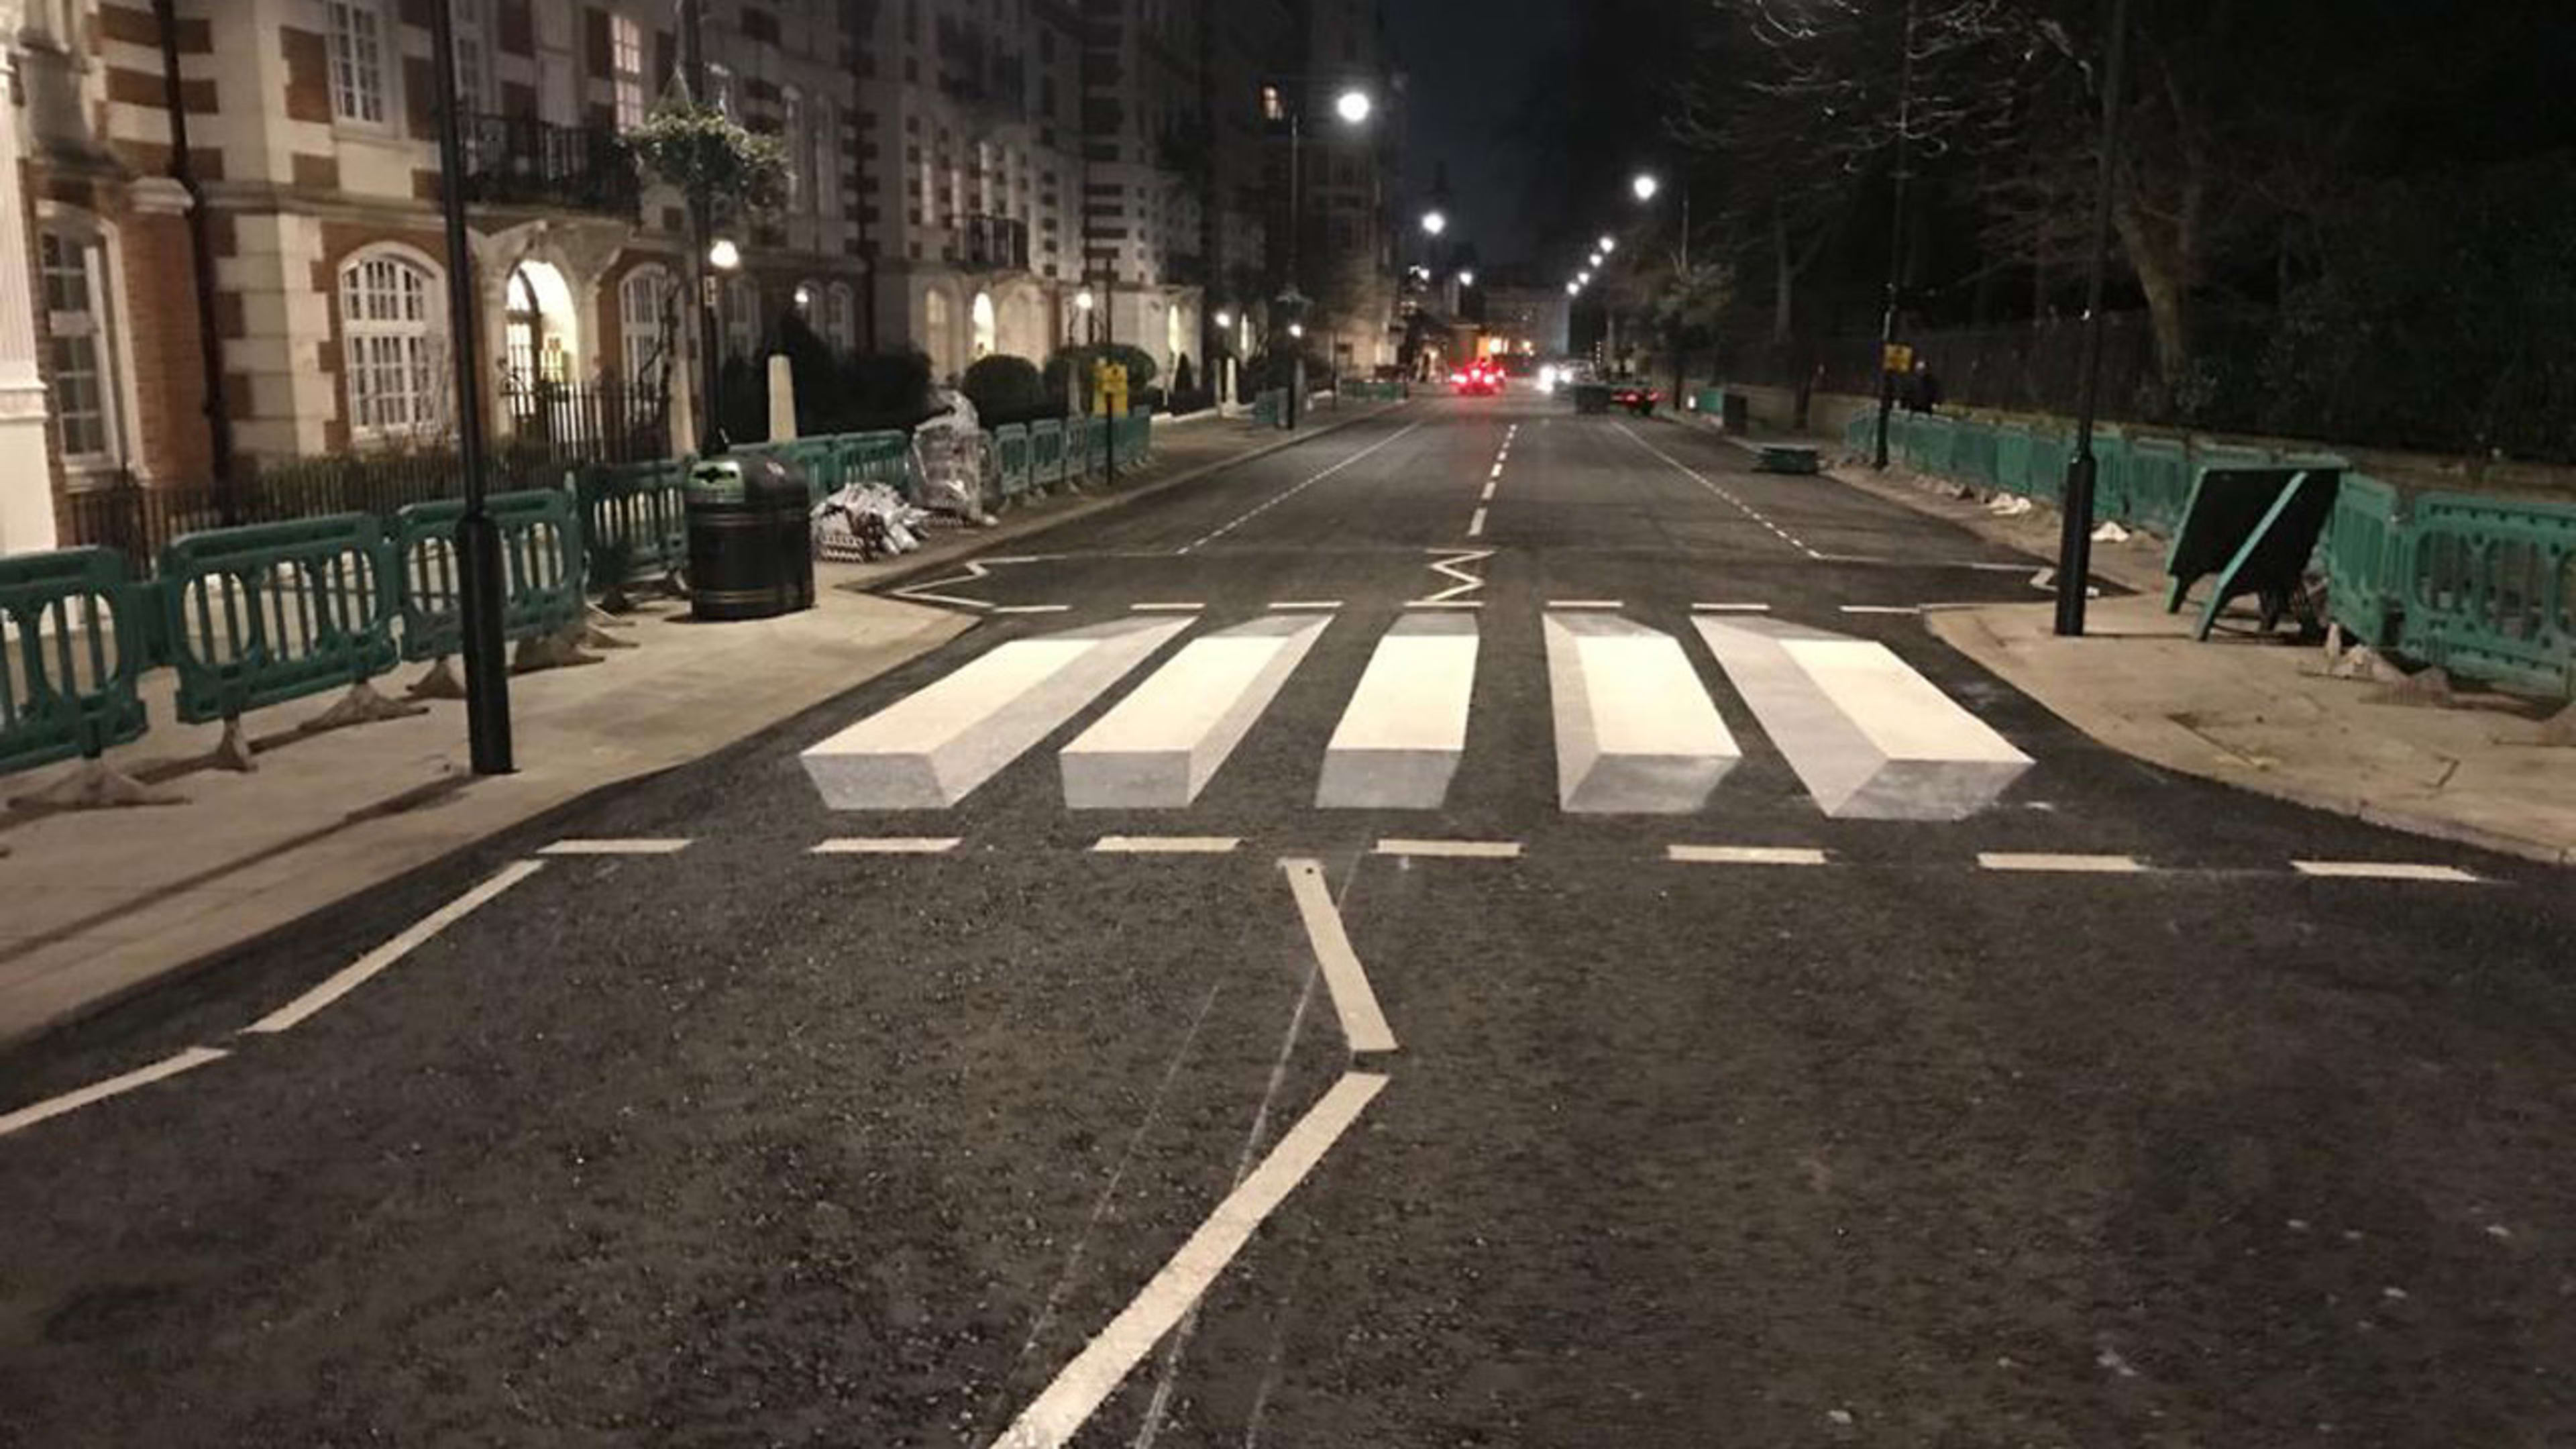 This optical illusion crosswalk in London tricks drivers into slowing down